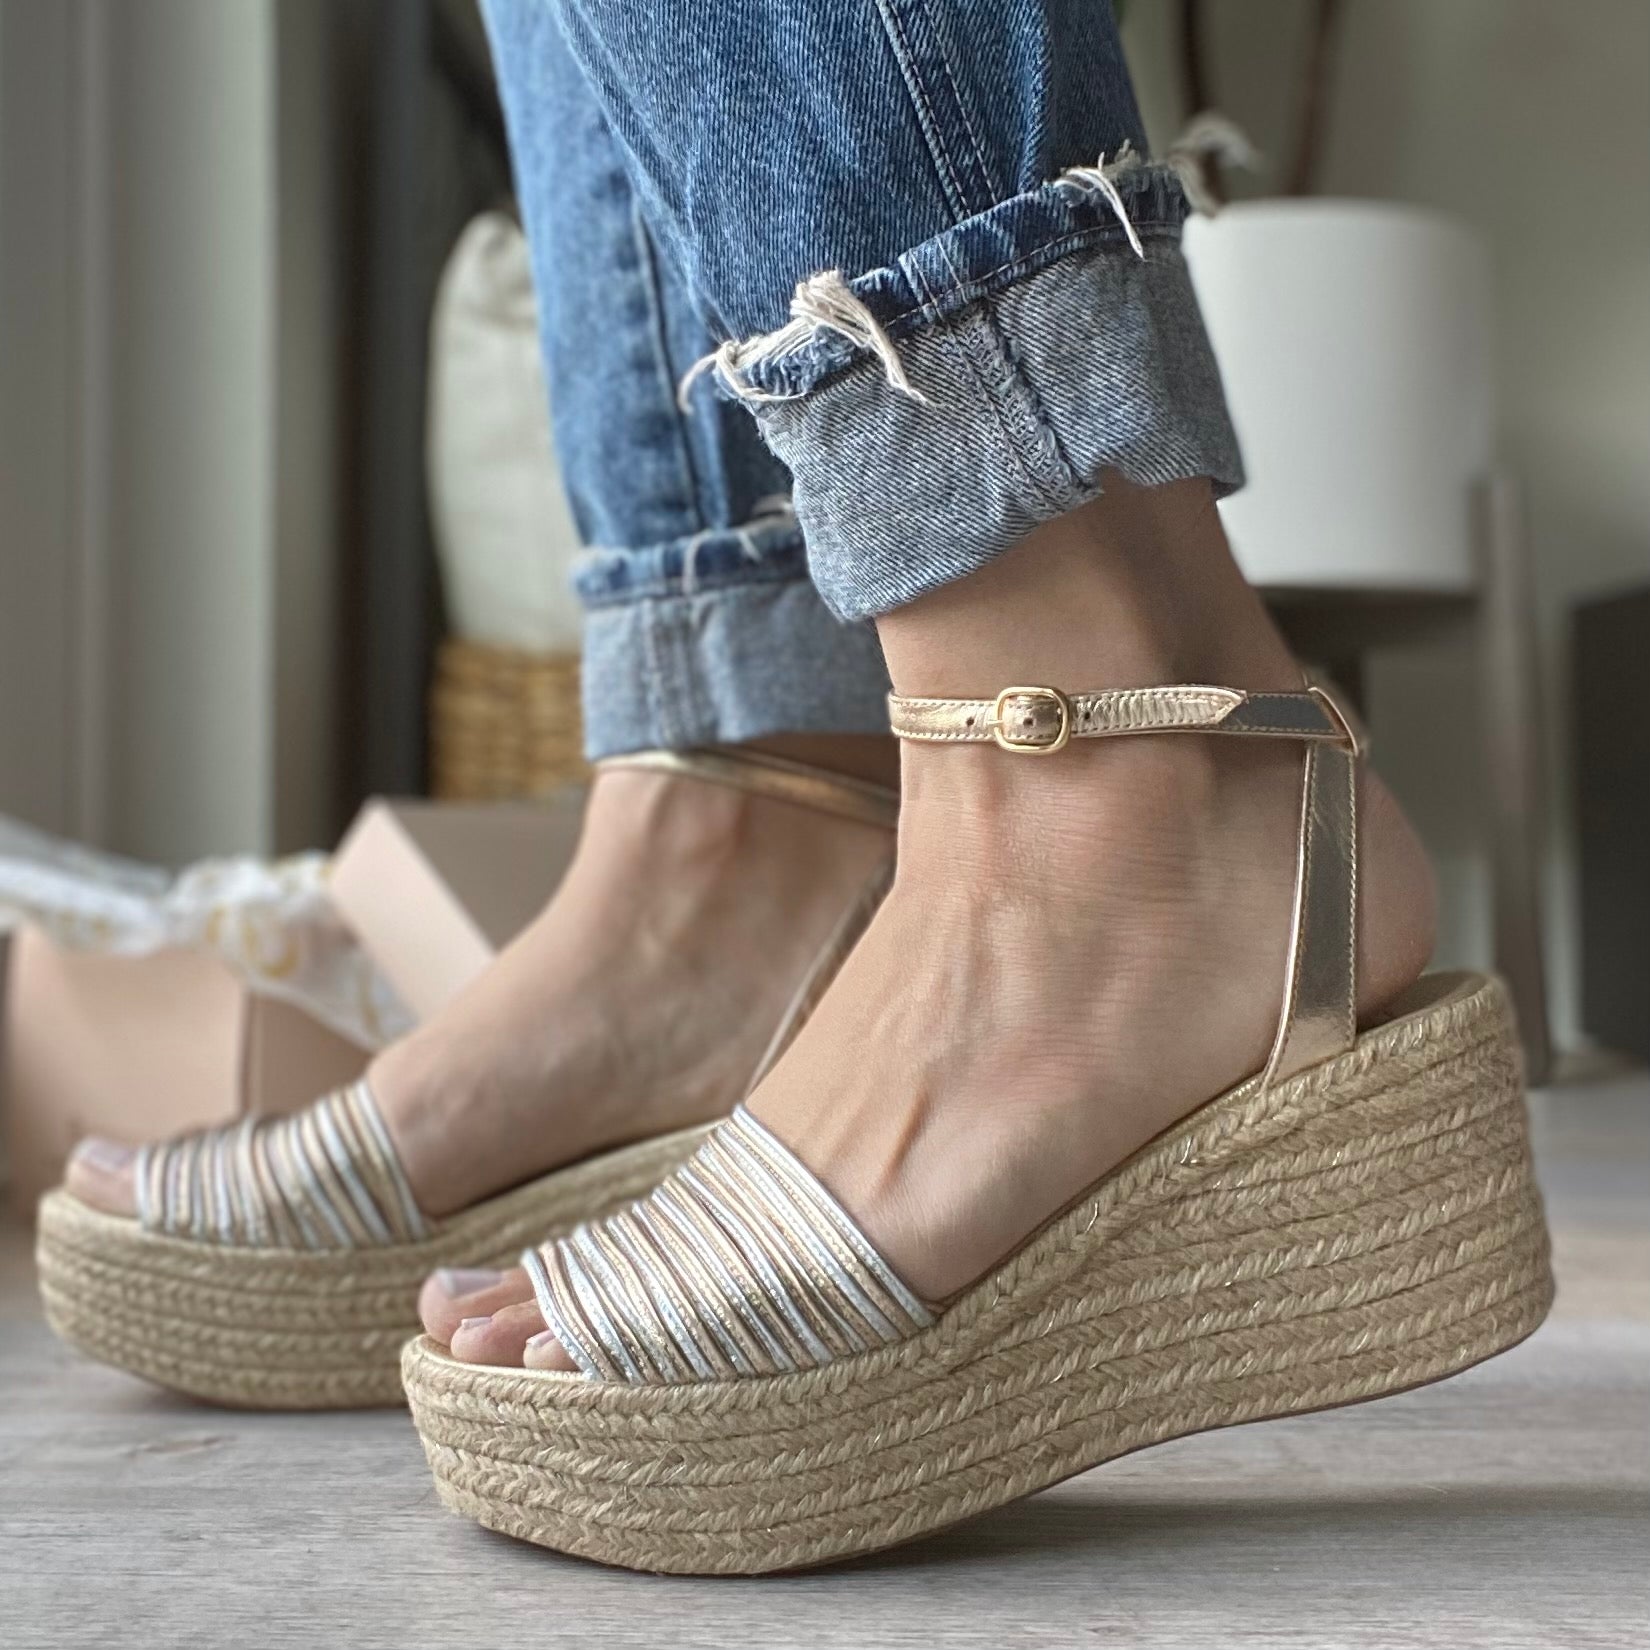 Holly Low High Espadrilles by Nataly Mendez Genuine leather upper material Leather insole lining Flexible rubber sole Handmade 3 inch heel height 1.75 inch platform